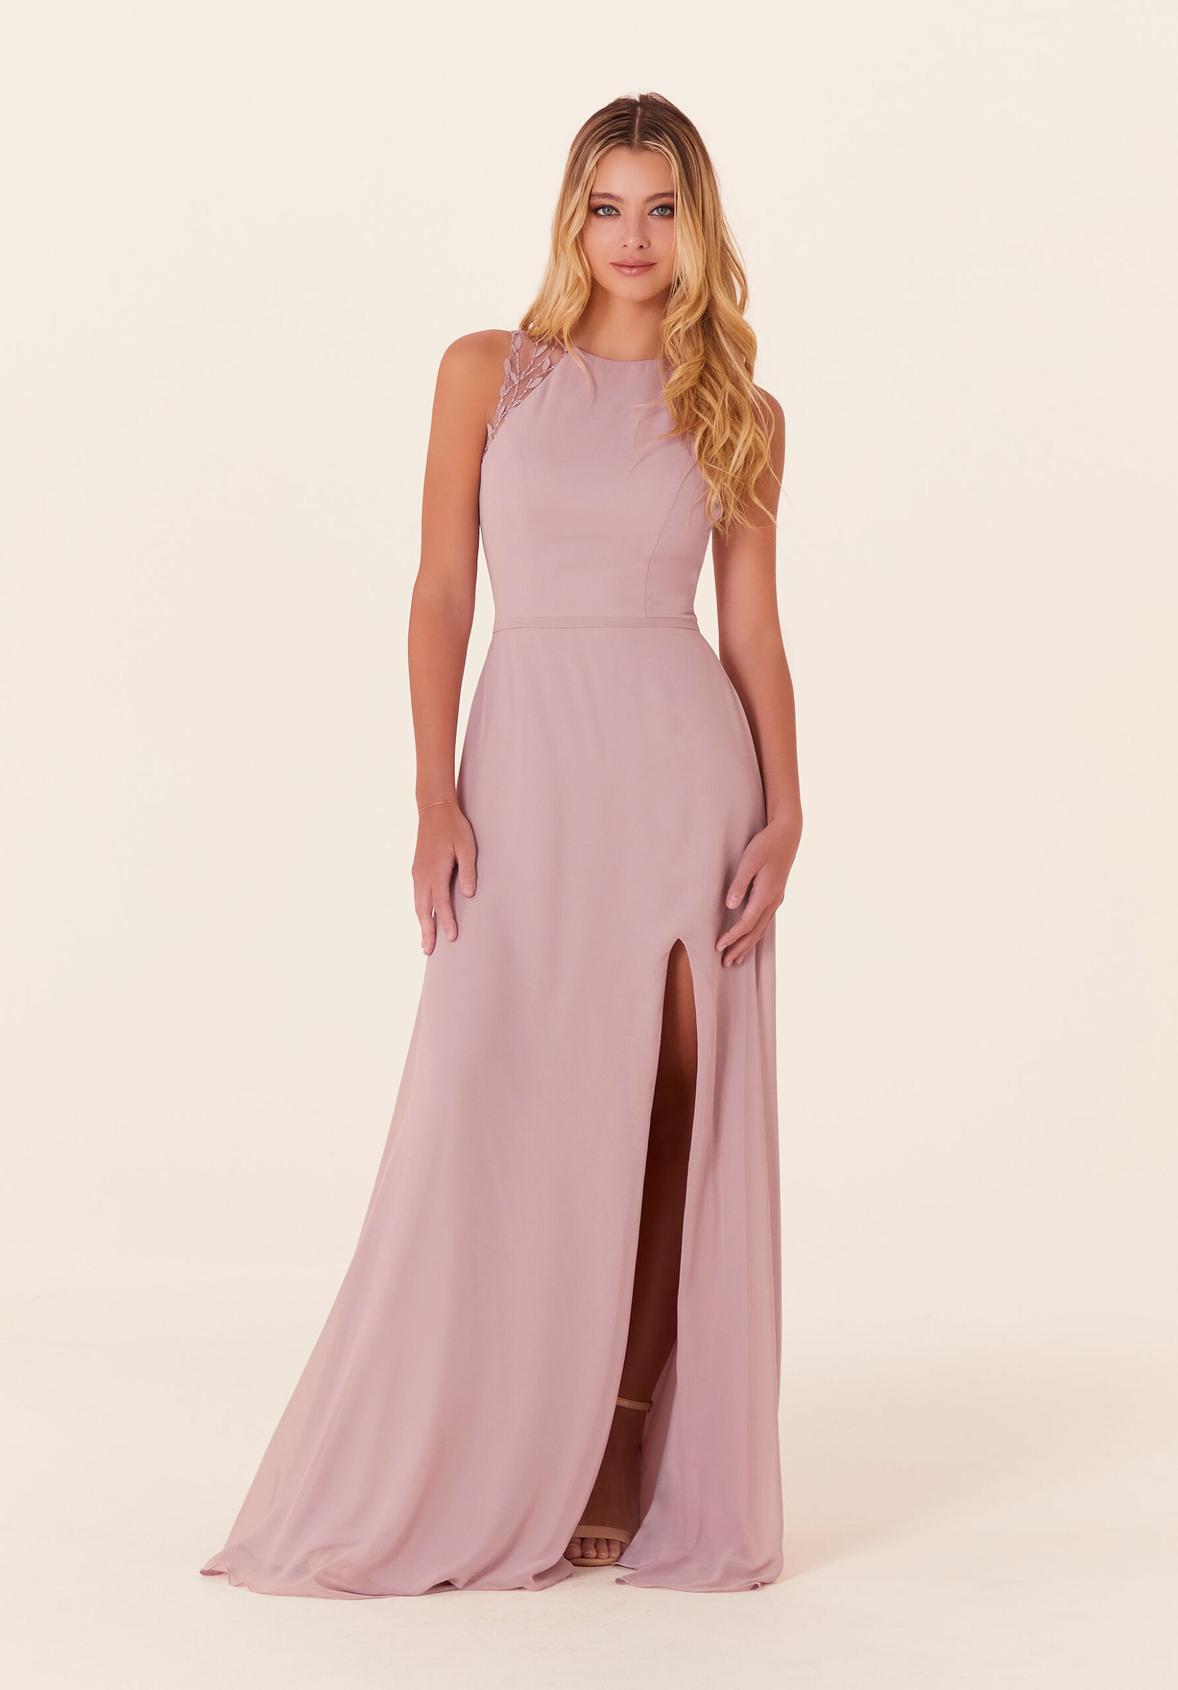 Chiffon Bridesmaid Dress with Leafy Appliqués offers in Morilee